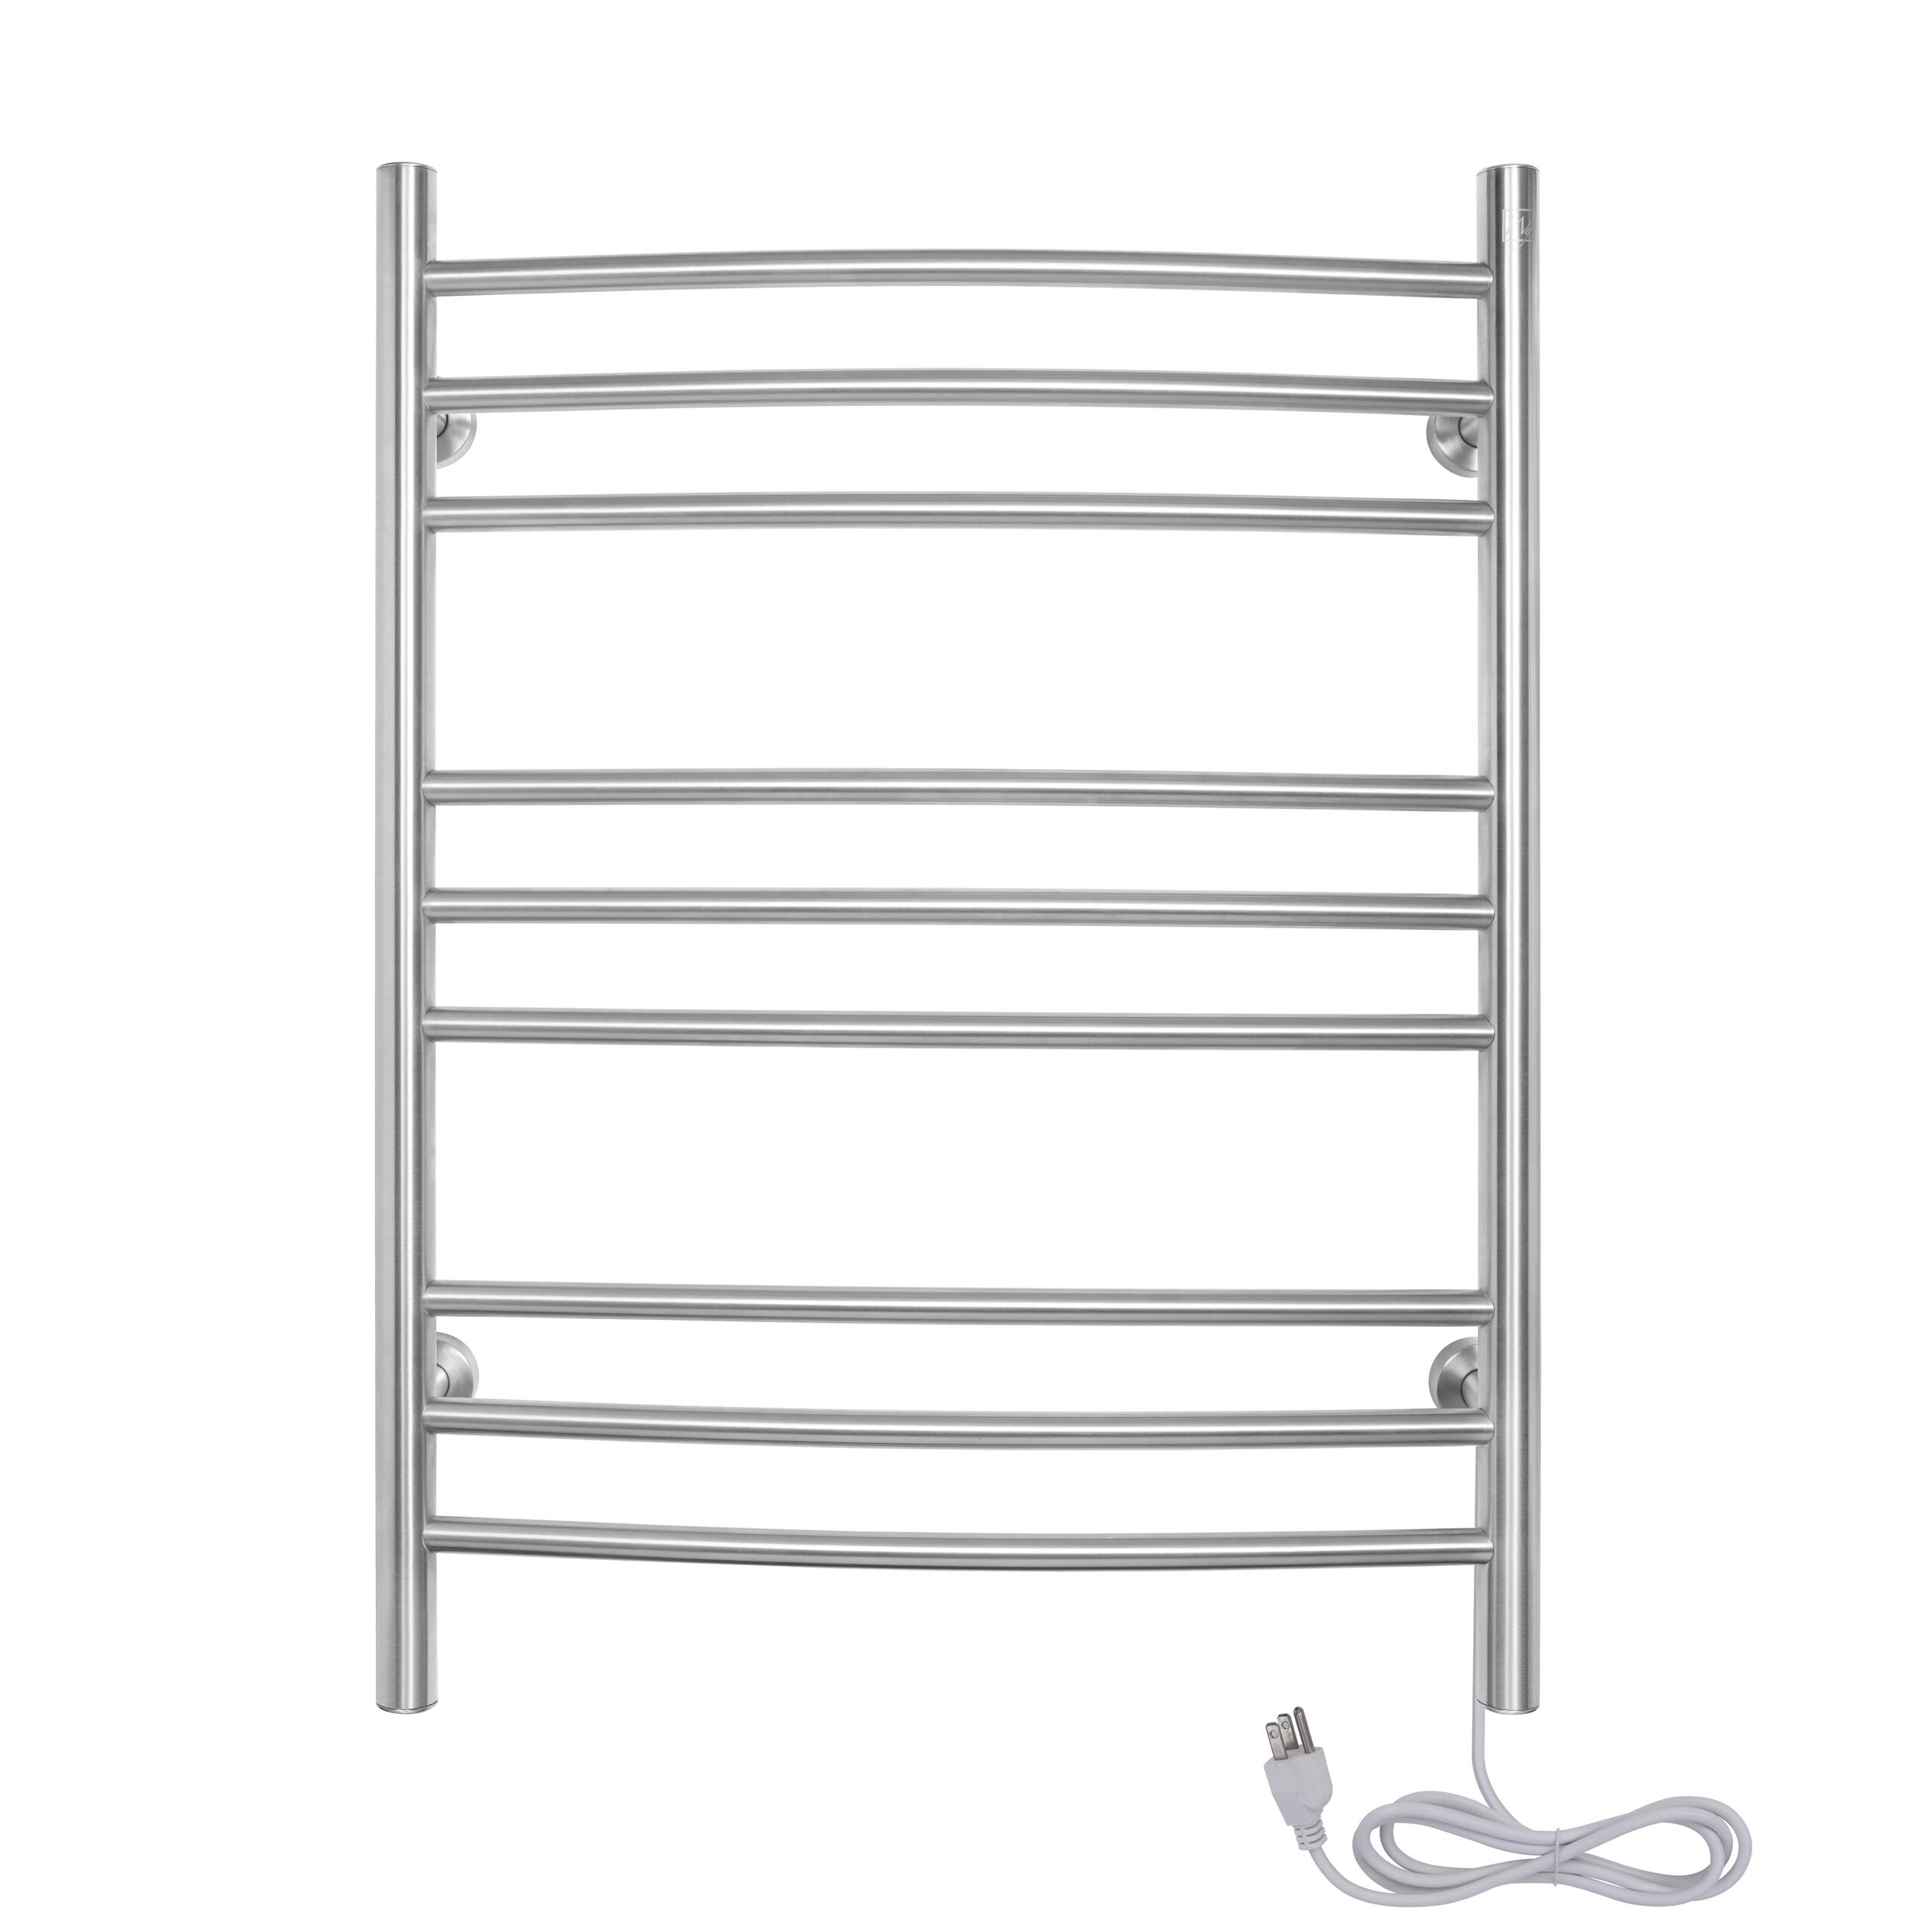 The Instant Towel Rack Precision-tuned steel 3' high rack drying space 